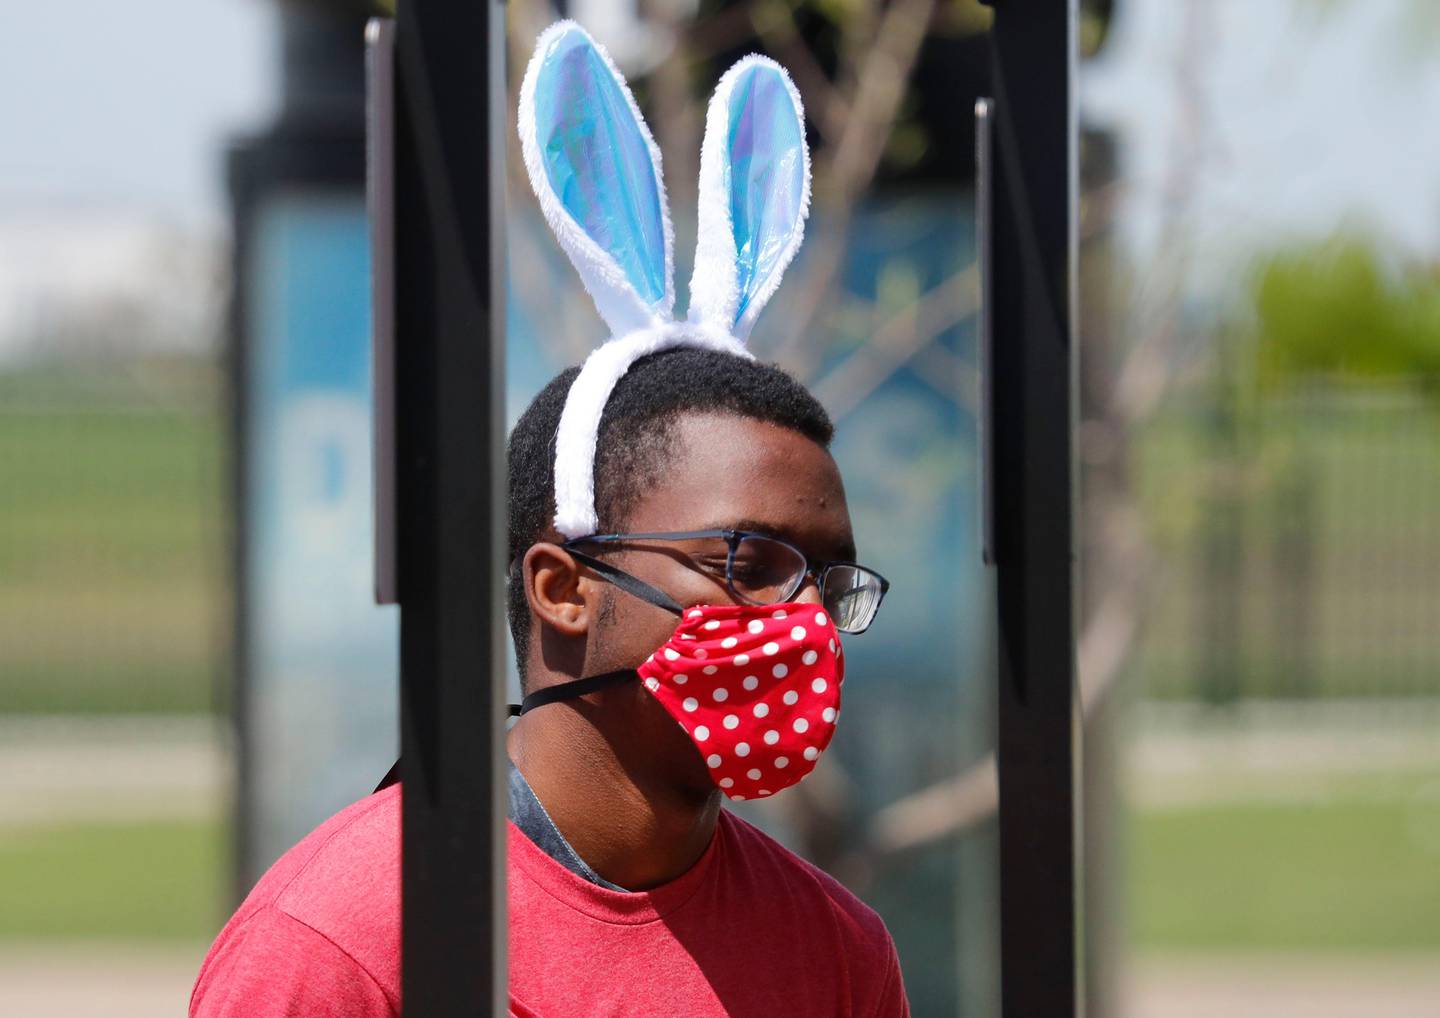 Amid COVID-19 concerns, a fast food worker wears a mask and Easter bunny ears as he works at a Chick-fil-A restaurant in Dallas, Tuesday, April 7, 2020. (AP Photo/LM Otero)